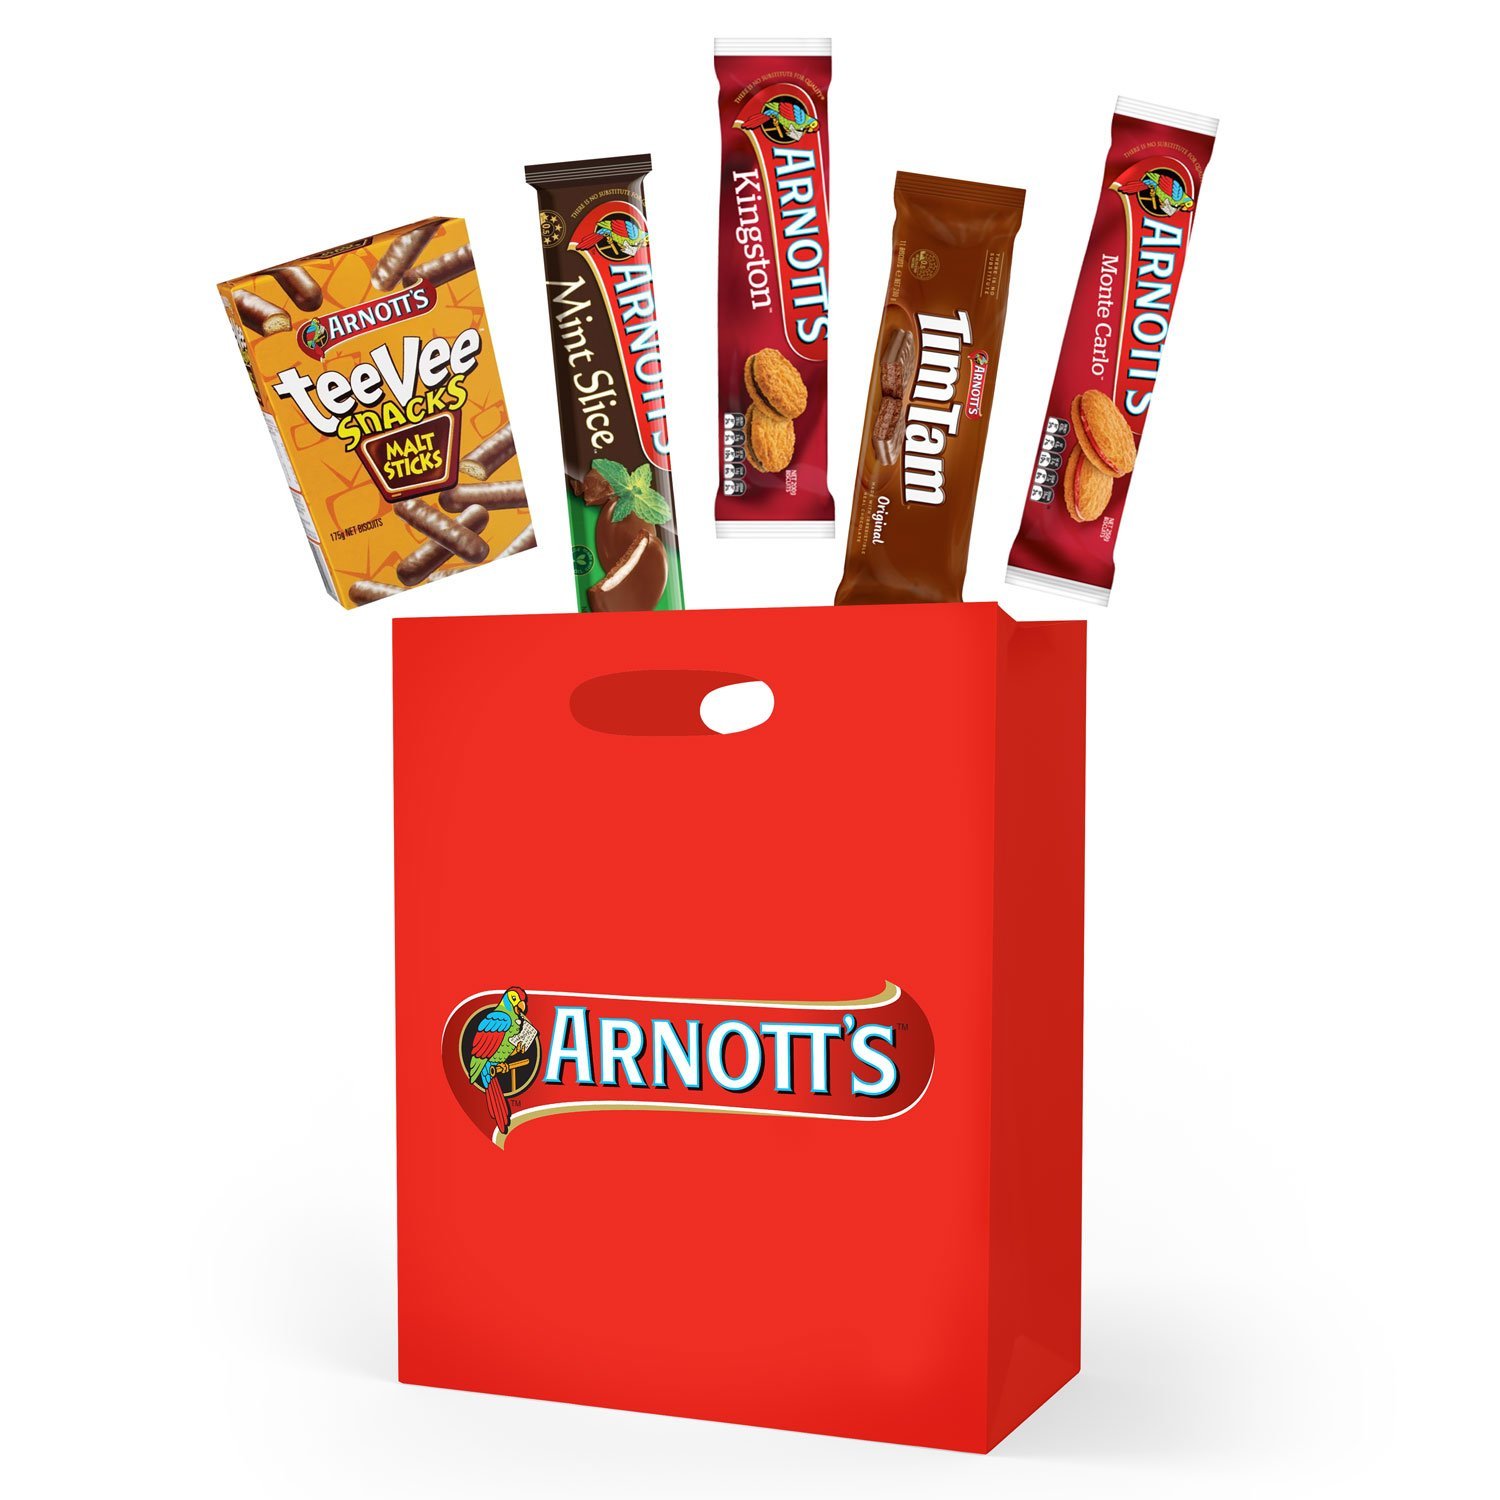 Arnotts_Biscuits